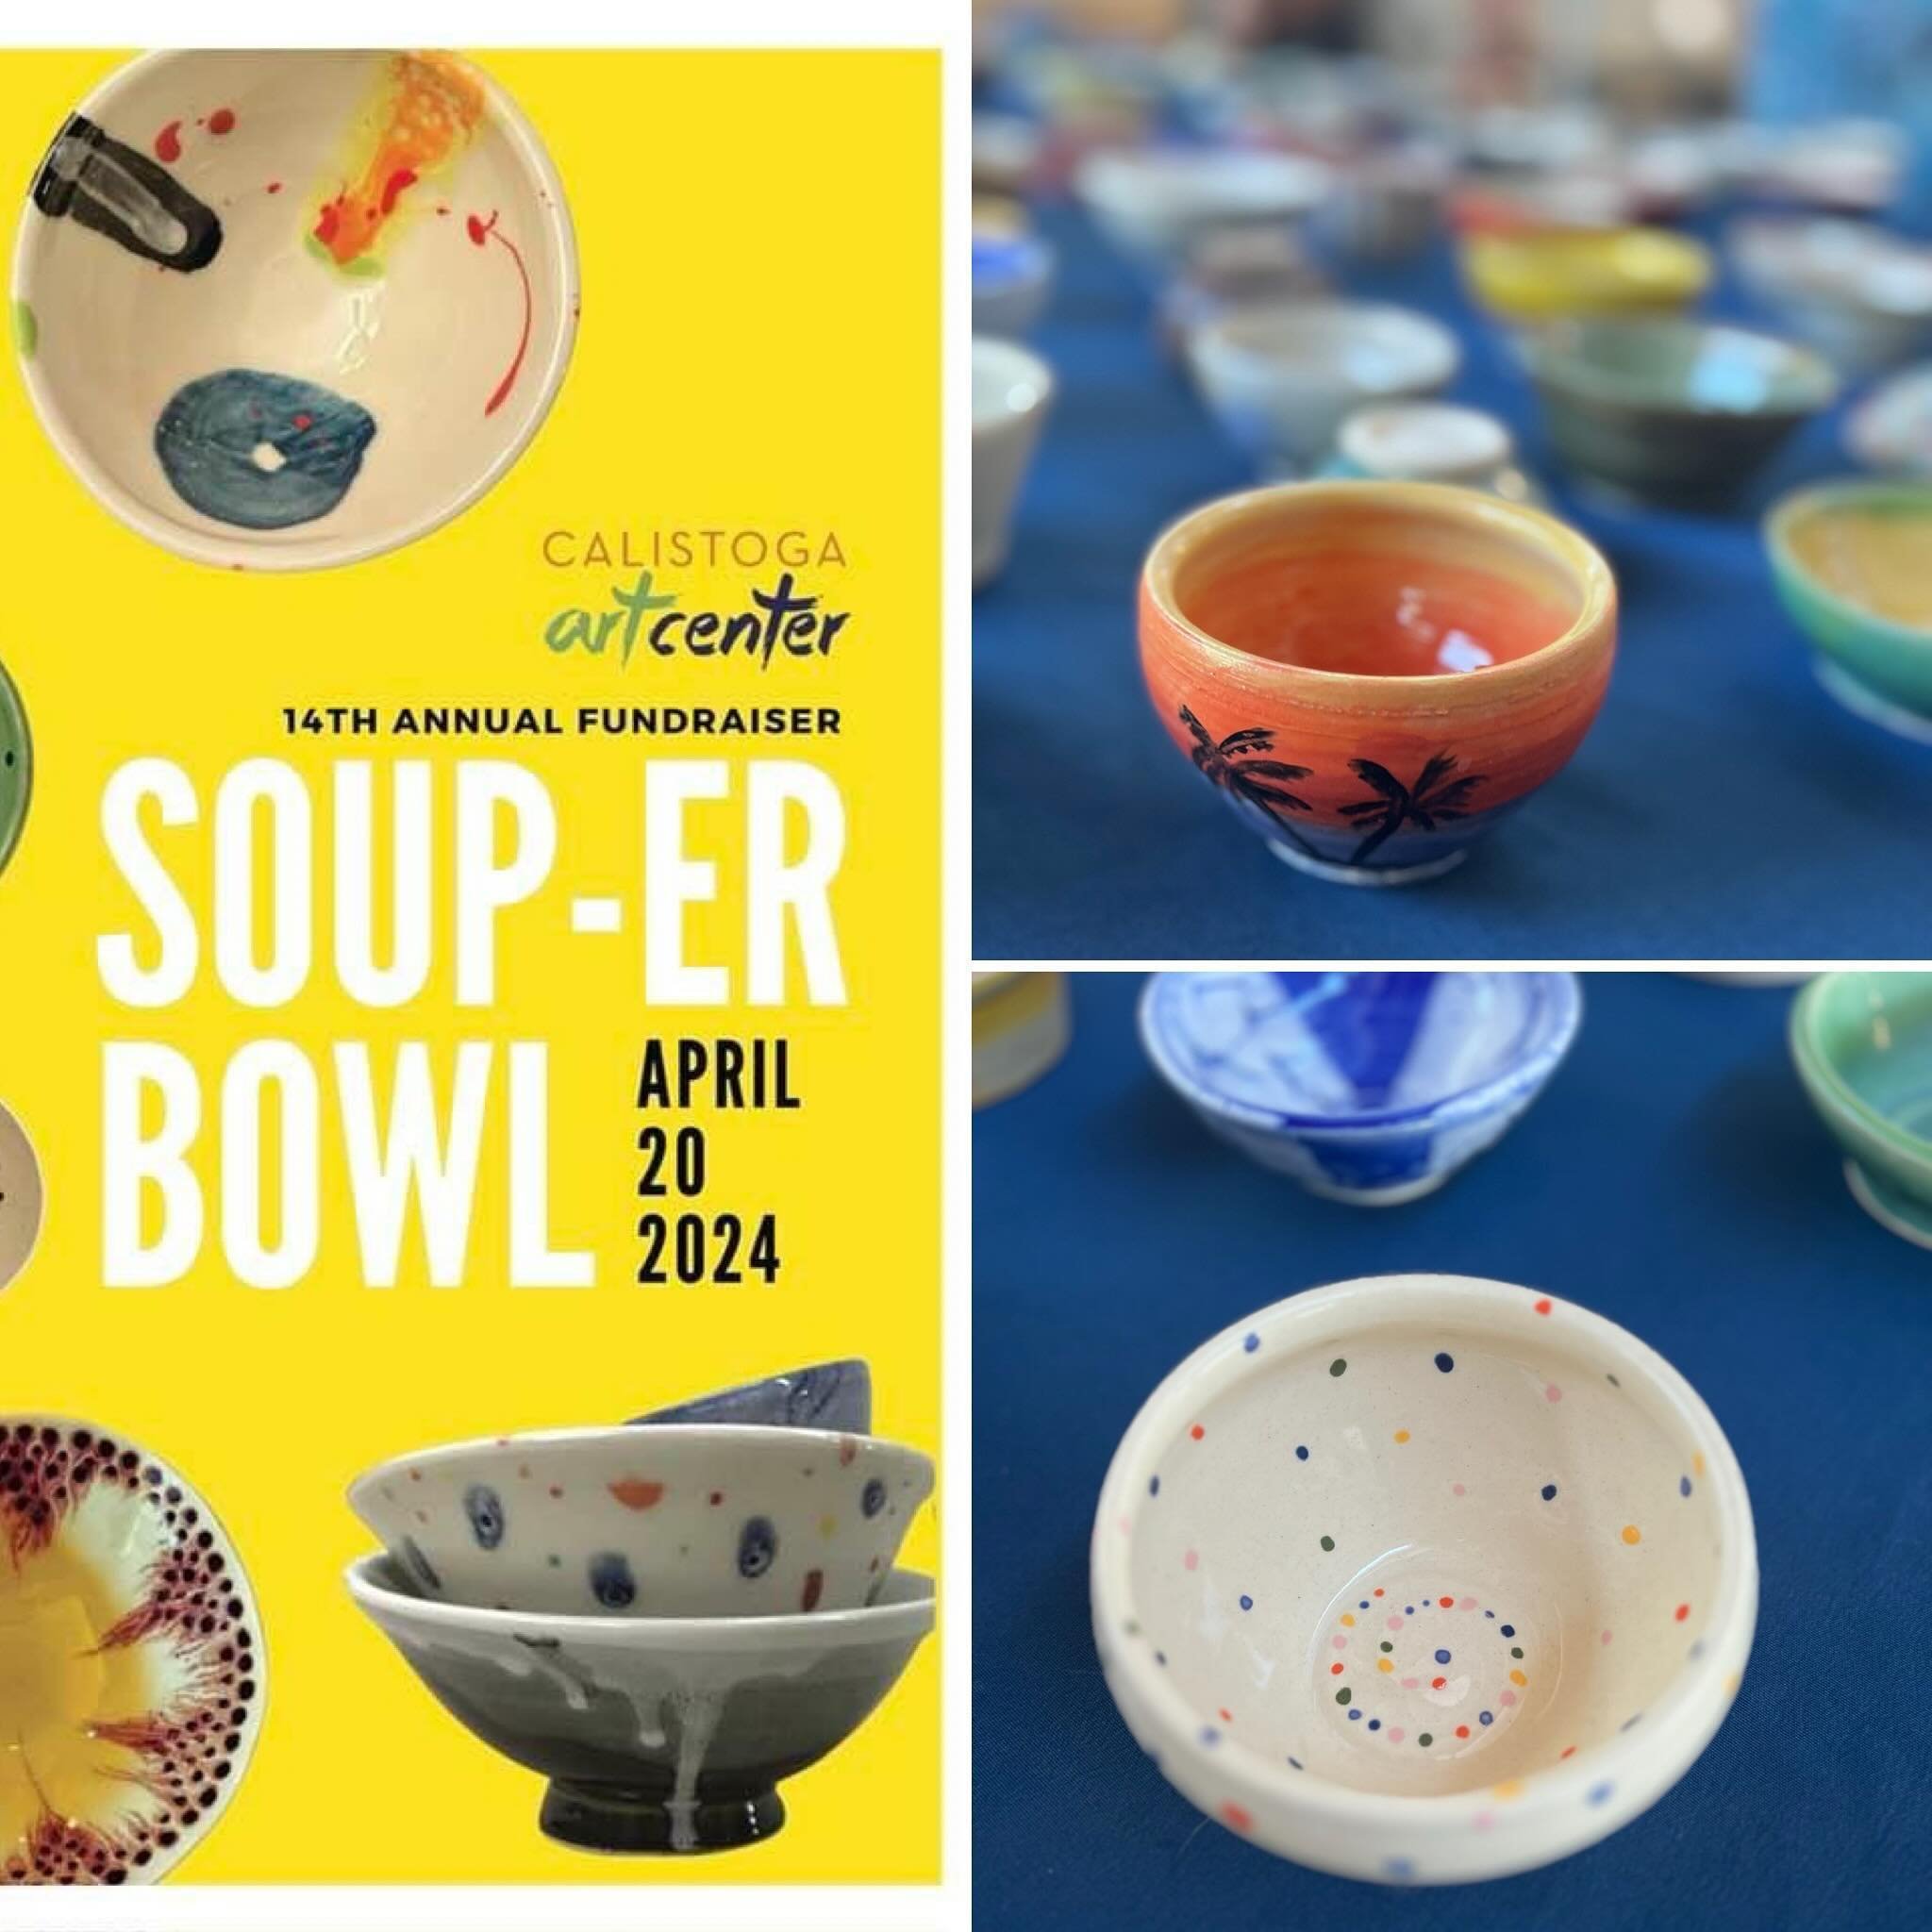 Proud to donate to and attend the 14th Annual Souper Bowl fundraiser for the Calistoga Art Center!  Lots of soup, wine, laughter and fun!  It takes a village!  @caliartcenter #ittakesavillage #fundraiser #smalltownlife #bedandbreakfast #thisiscalisto